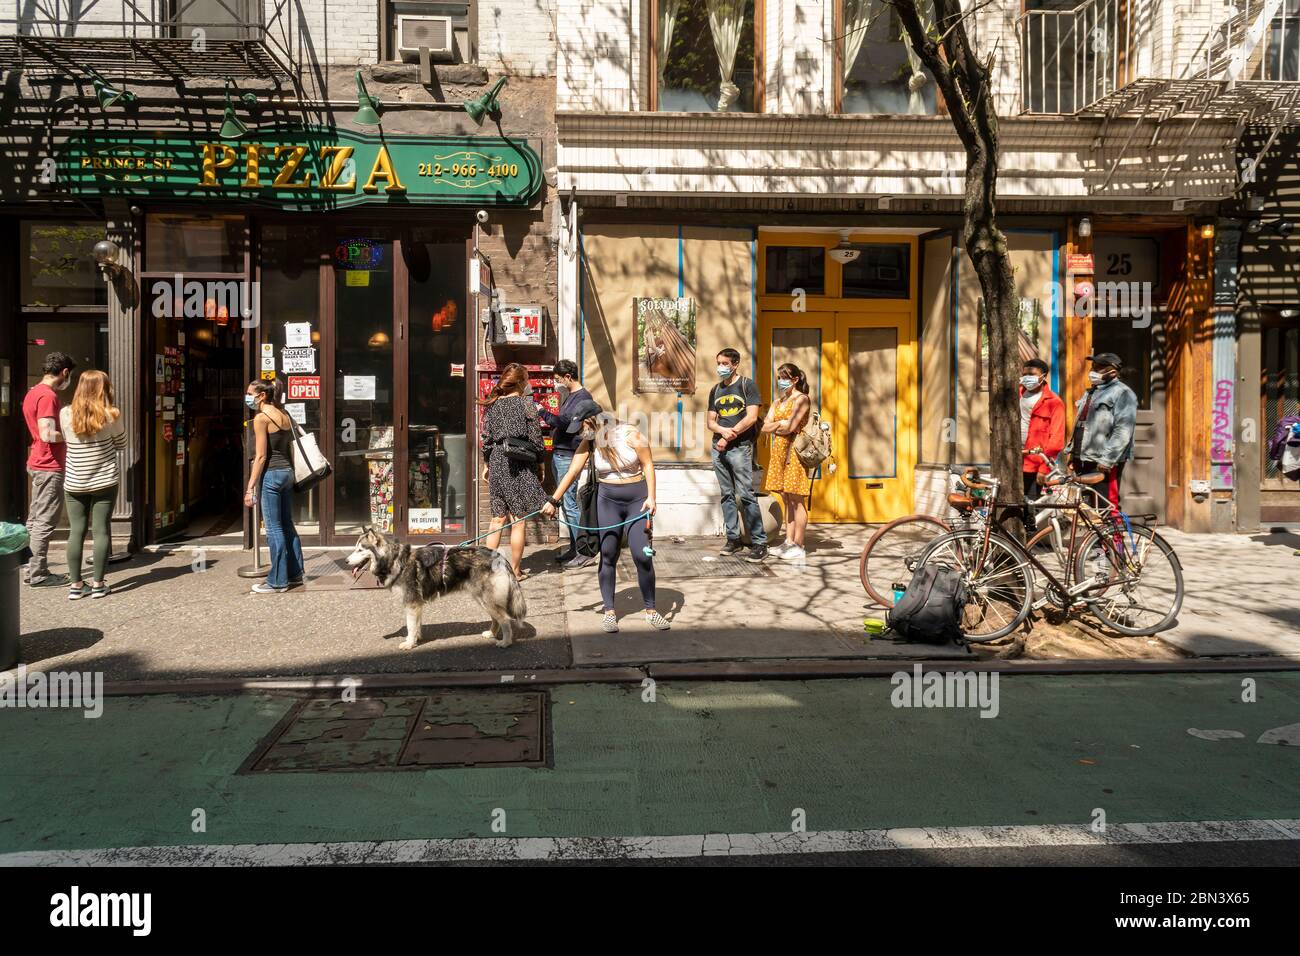 Prince Street New York High Resolution Stock Photography and Images - Alamy